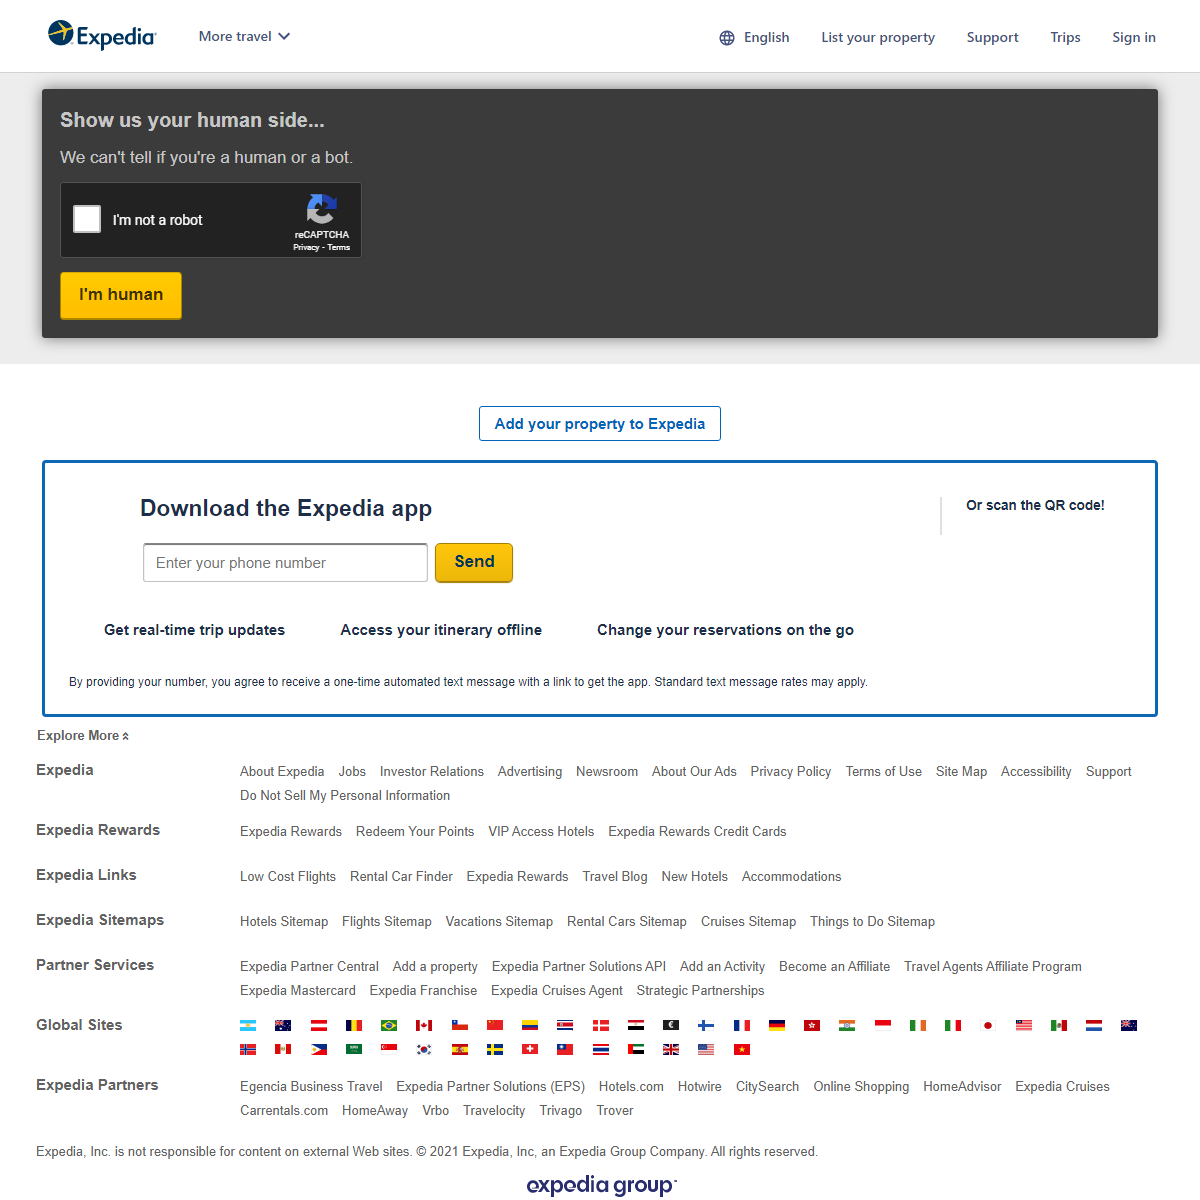 A complete backup of https://www.expedia.com/Las-Vegas-Hotels-Plaza-Hotel-And-Casino-Las-Vegas.h19.Hotel-Information